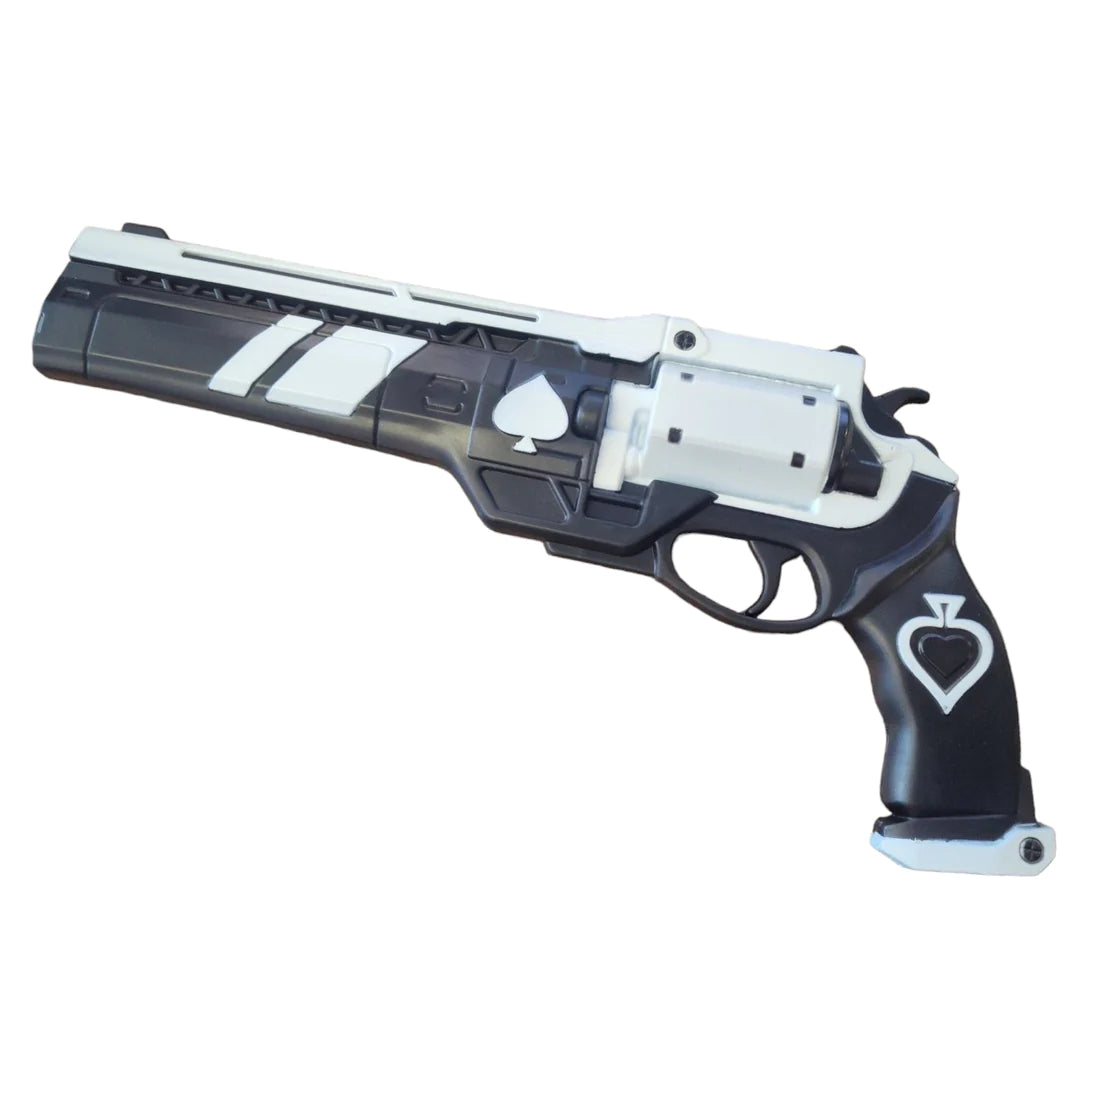 Replica Foam Gun Ace of The Spades Hand Cannon Prop Classic Ornament Free Banner Does not Shoot Gift Xmas Game Anime